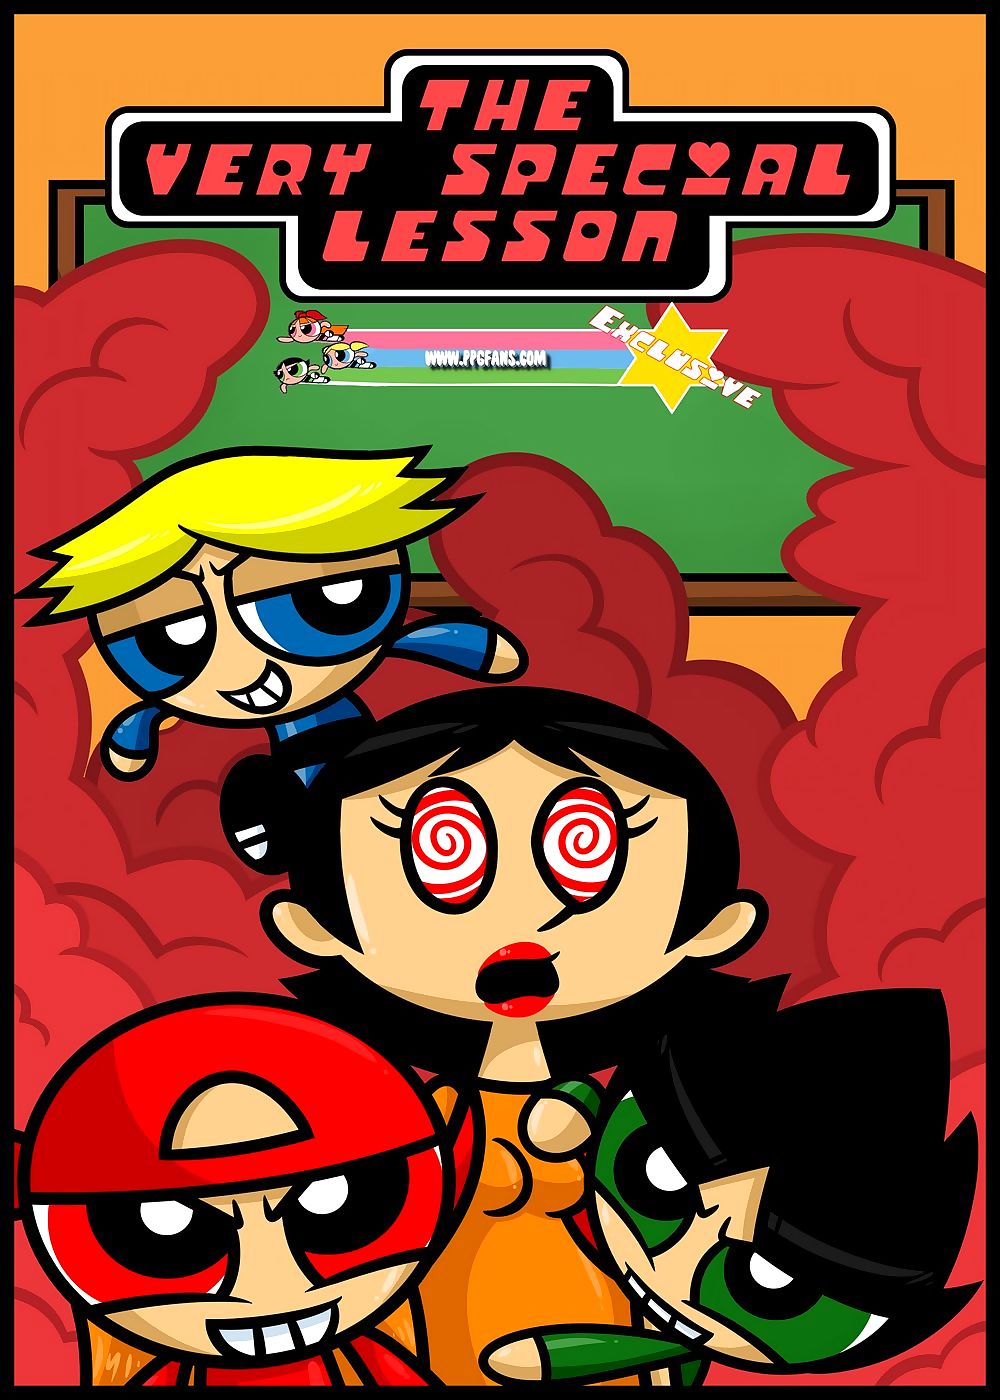 Xierra099- The Very Special Lesson page 1